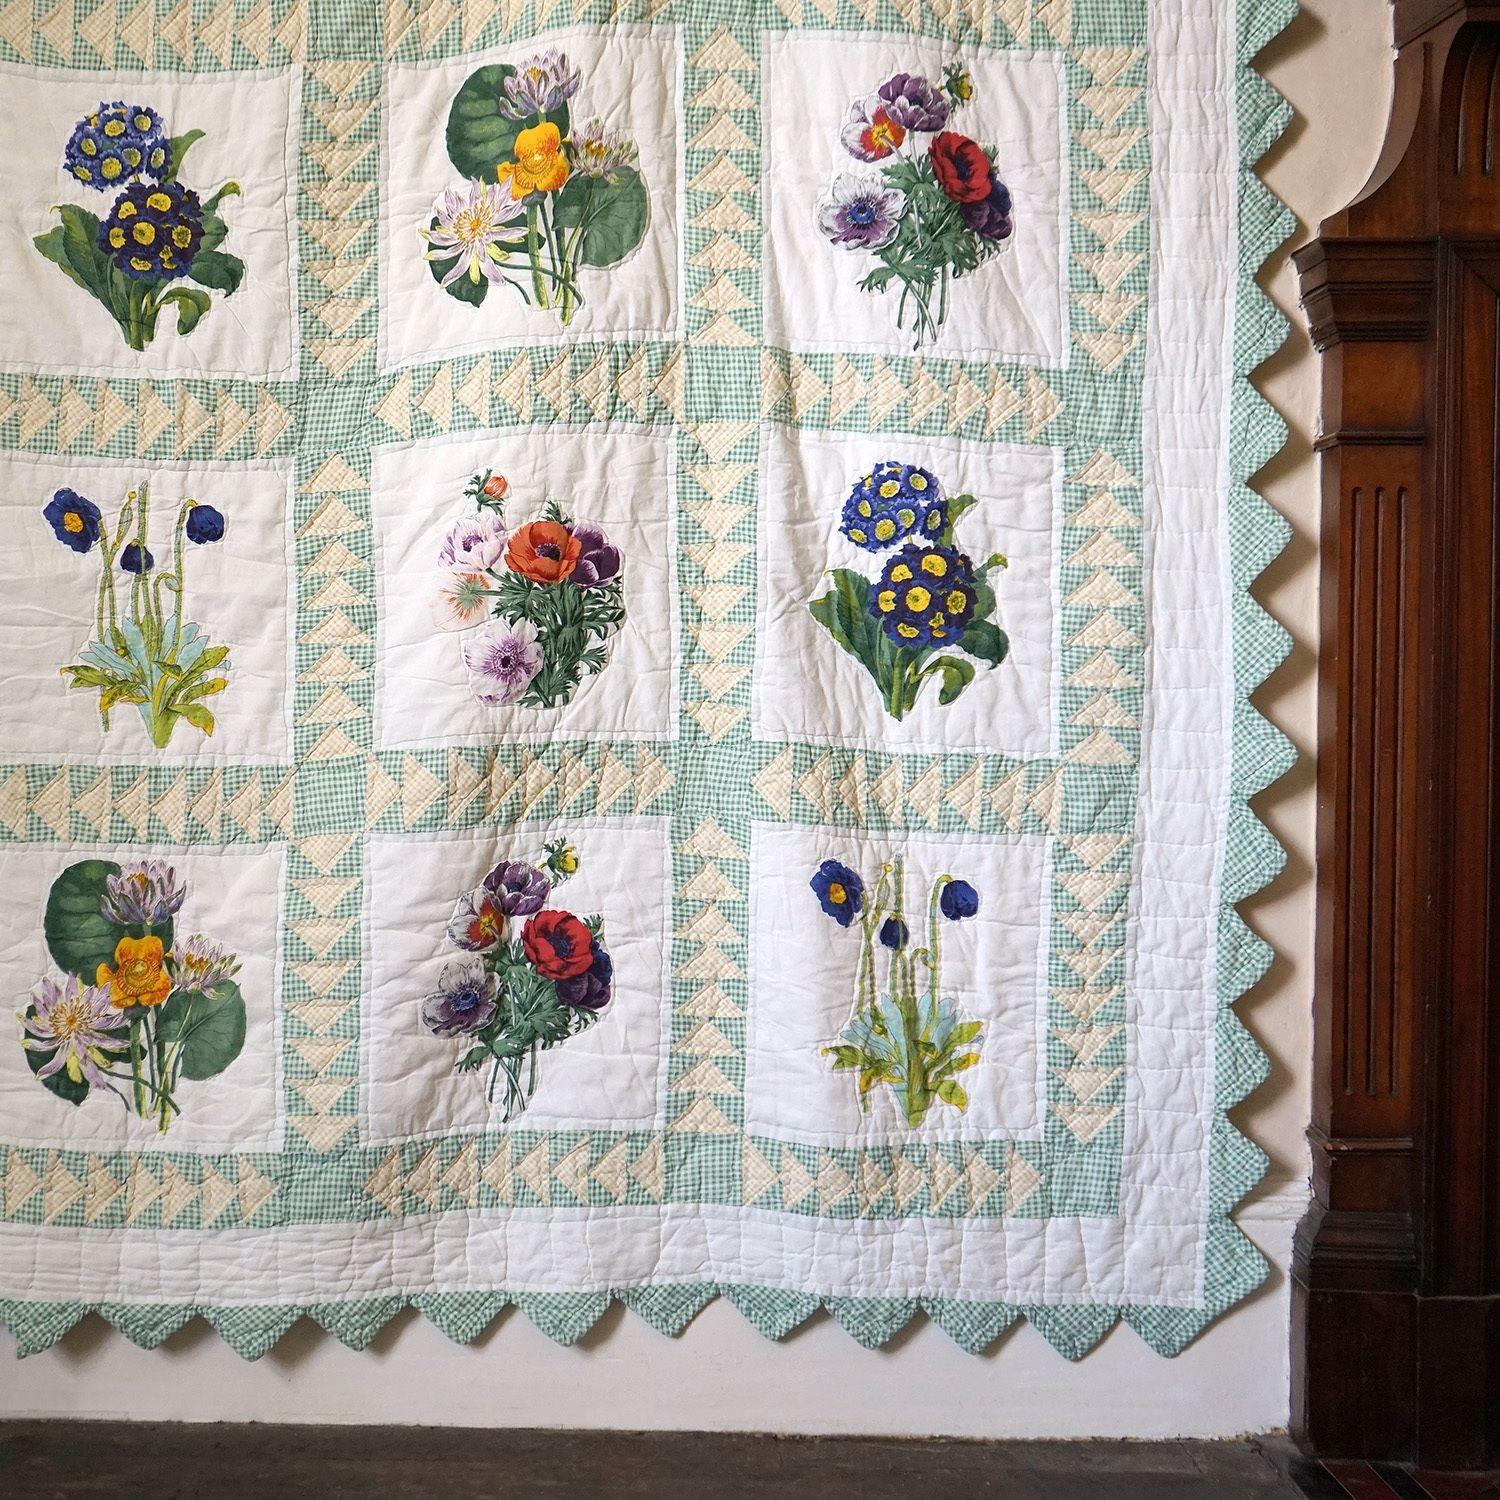 Vintage King-Sized Handmade blanket quilt

Originating from Kansas and probably dating from the mid-20th century.

White ground with a green gingham grid with yellow gingham triangular details that showcases 25 different floral panels.

Green